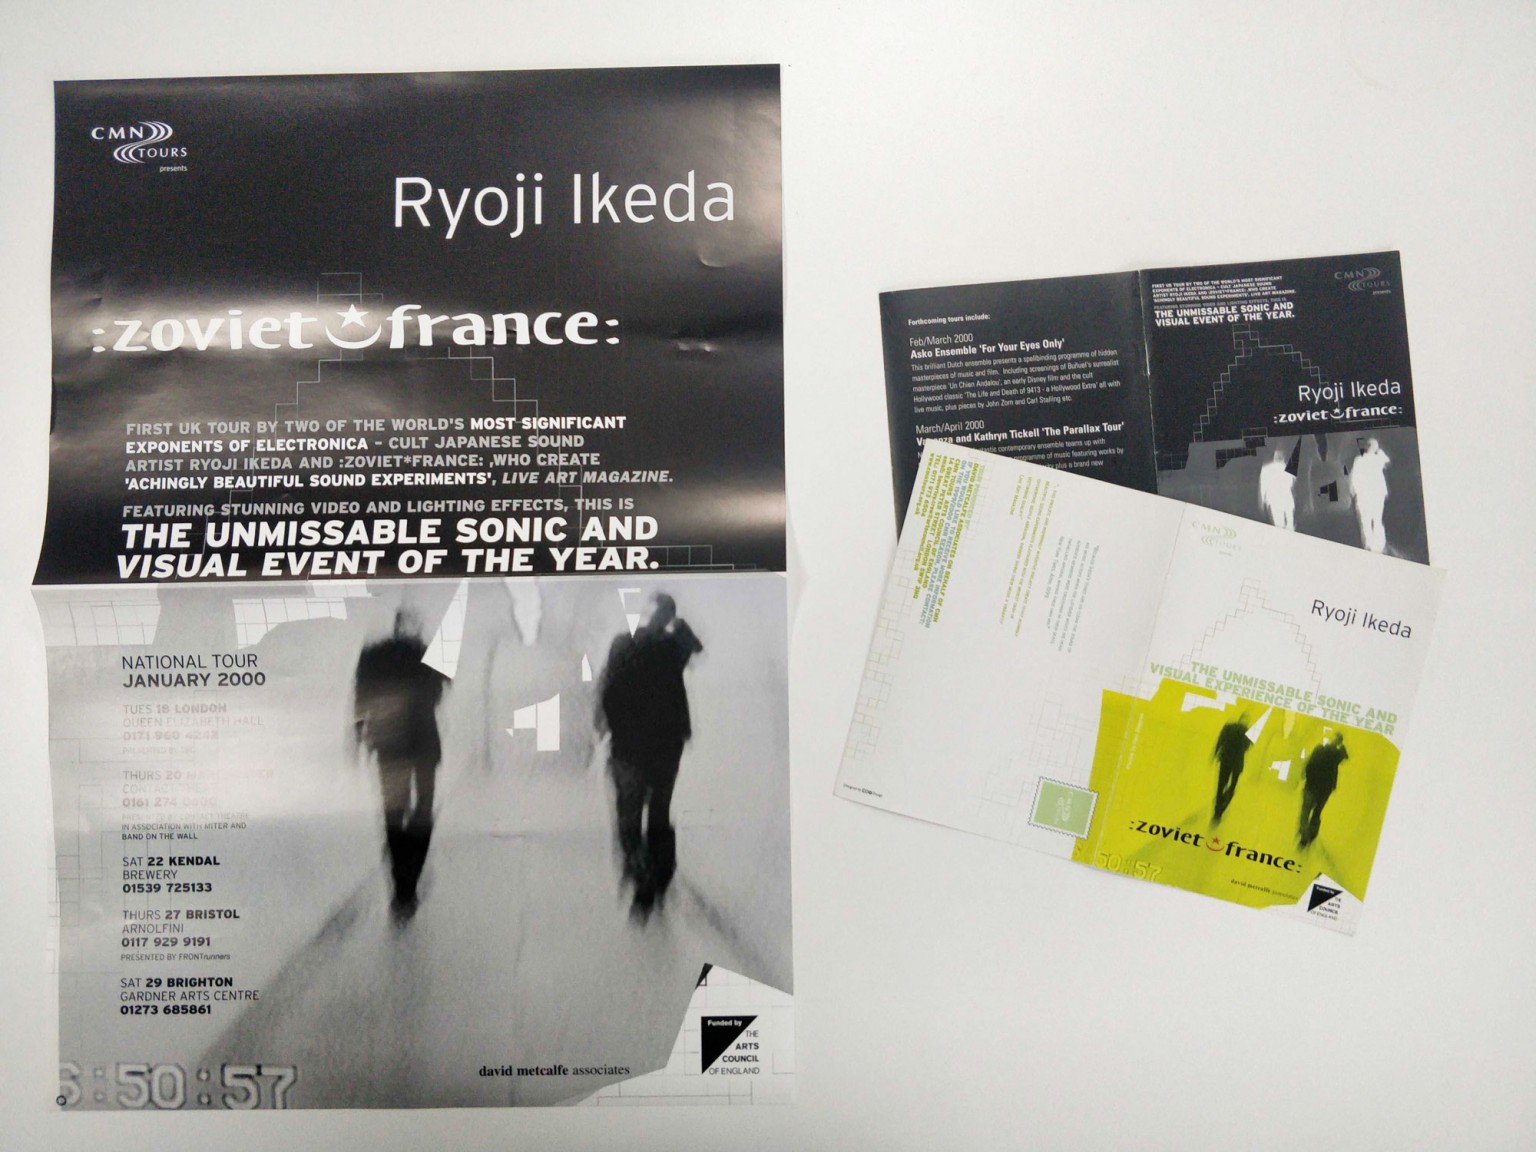 Print publicity for Ikeda's tour, designed by Cog